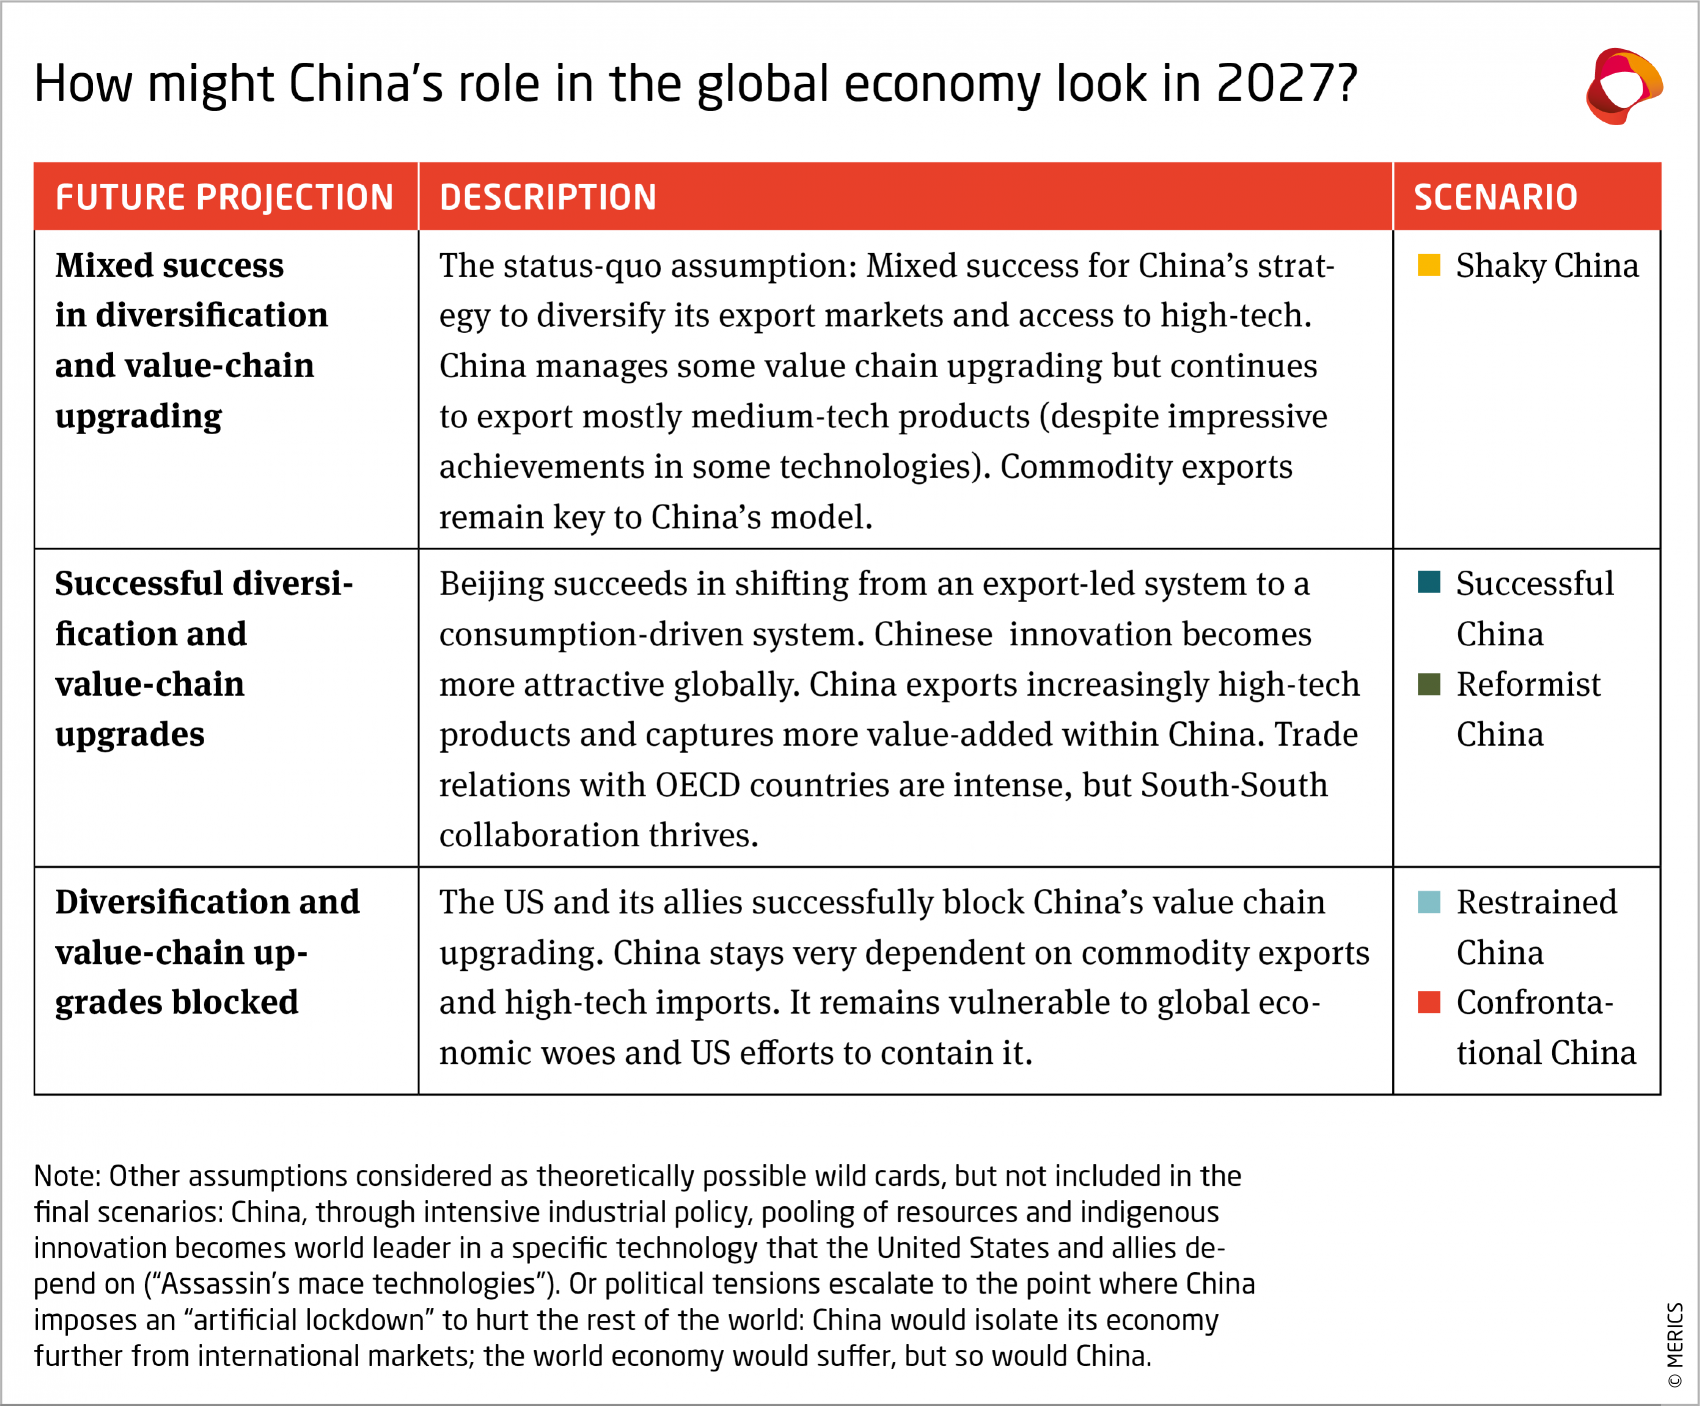 China in the global economy in 2027